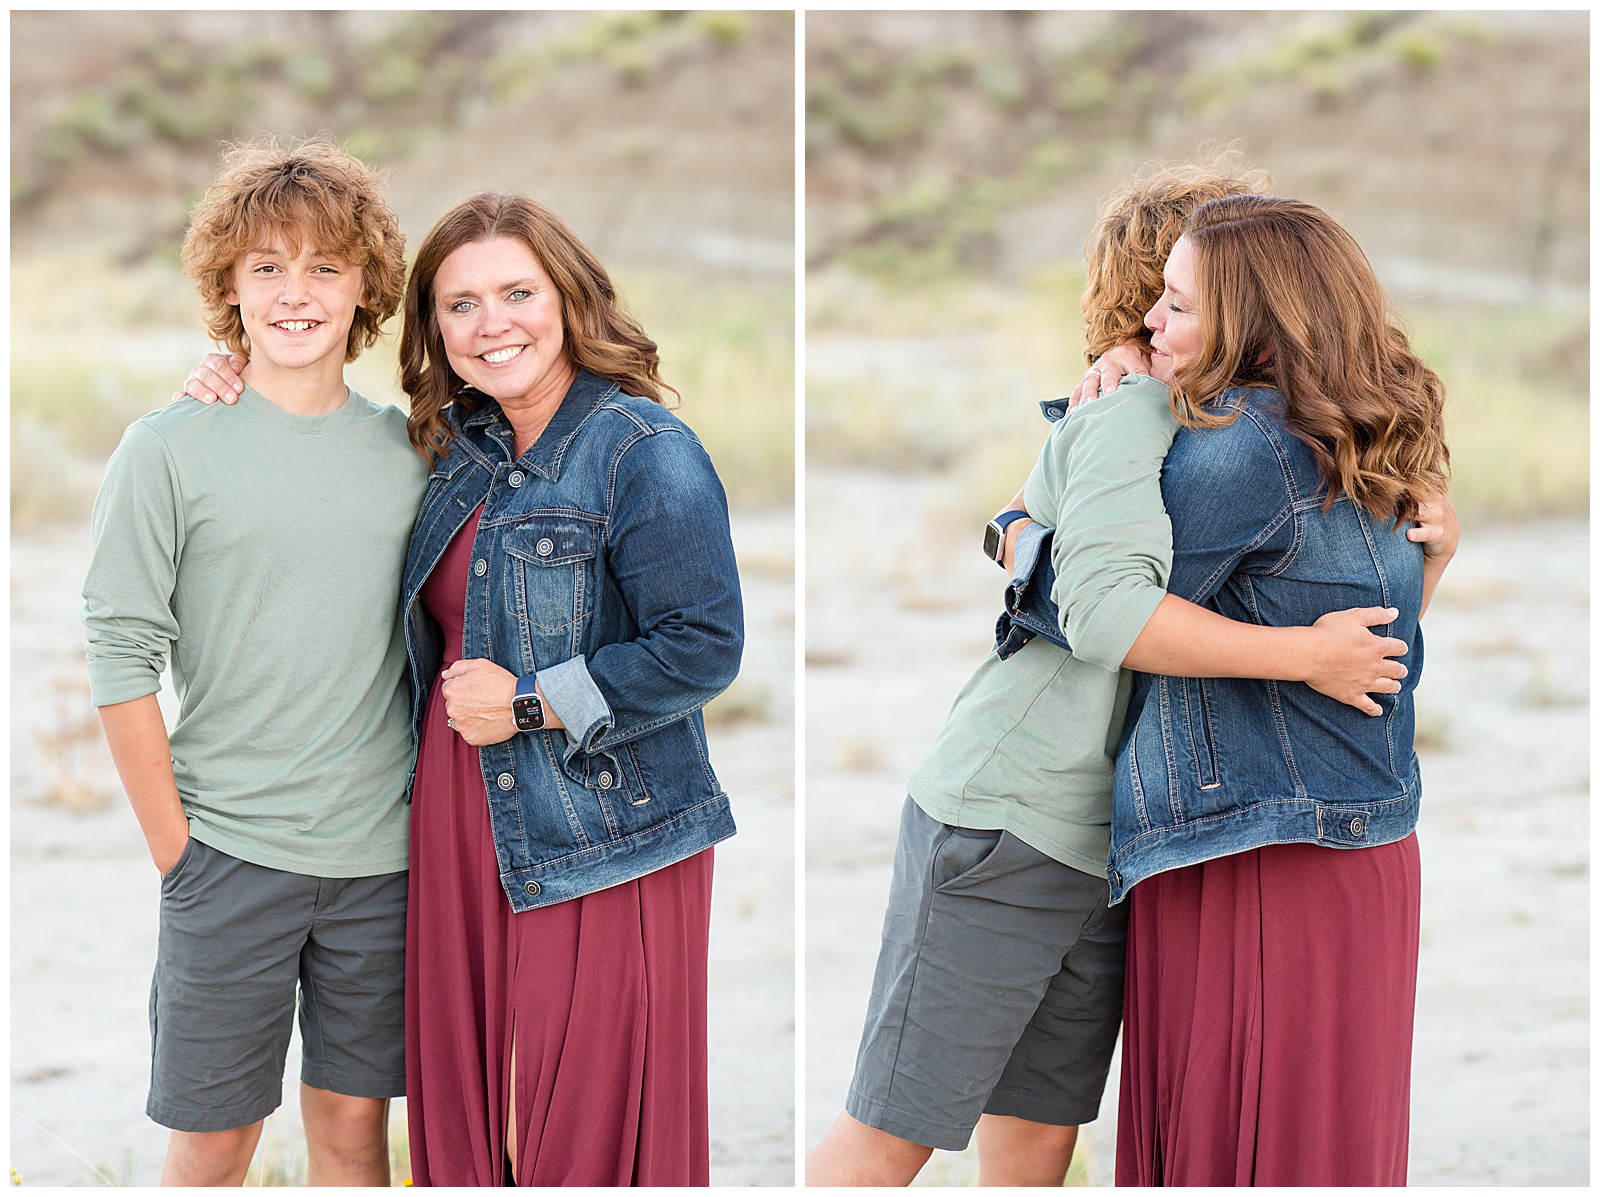 Mom takes picture with teen son during family photography session in North Dakota taken by Rebecca Rice Photography. Mom hugs teen son wearing coordinating outfits in burgundy, denim, and green.